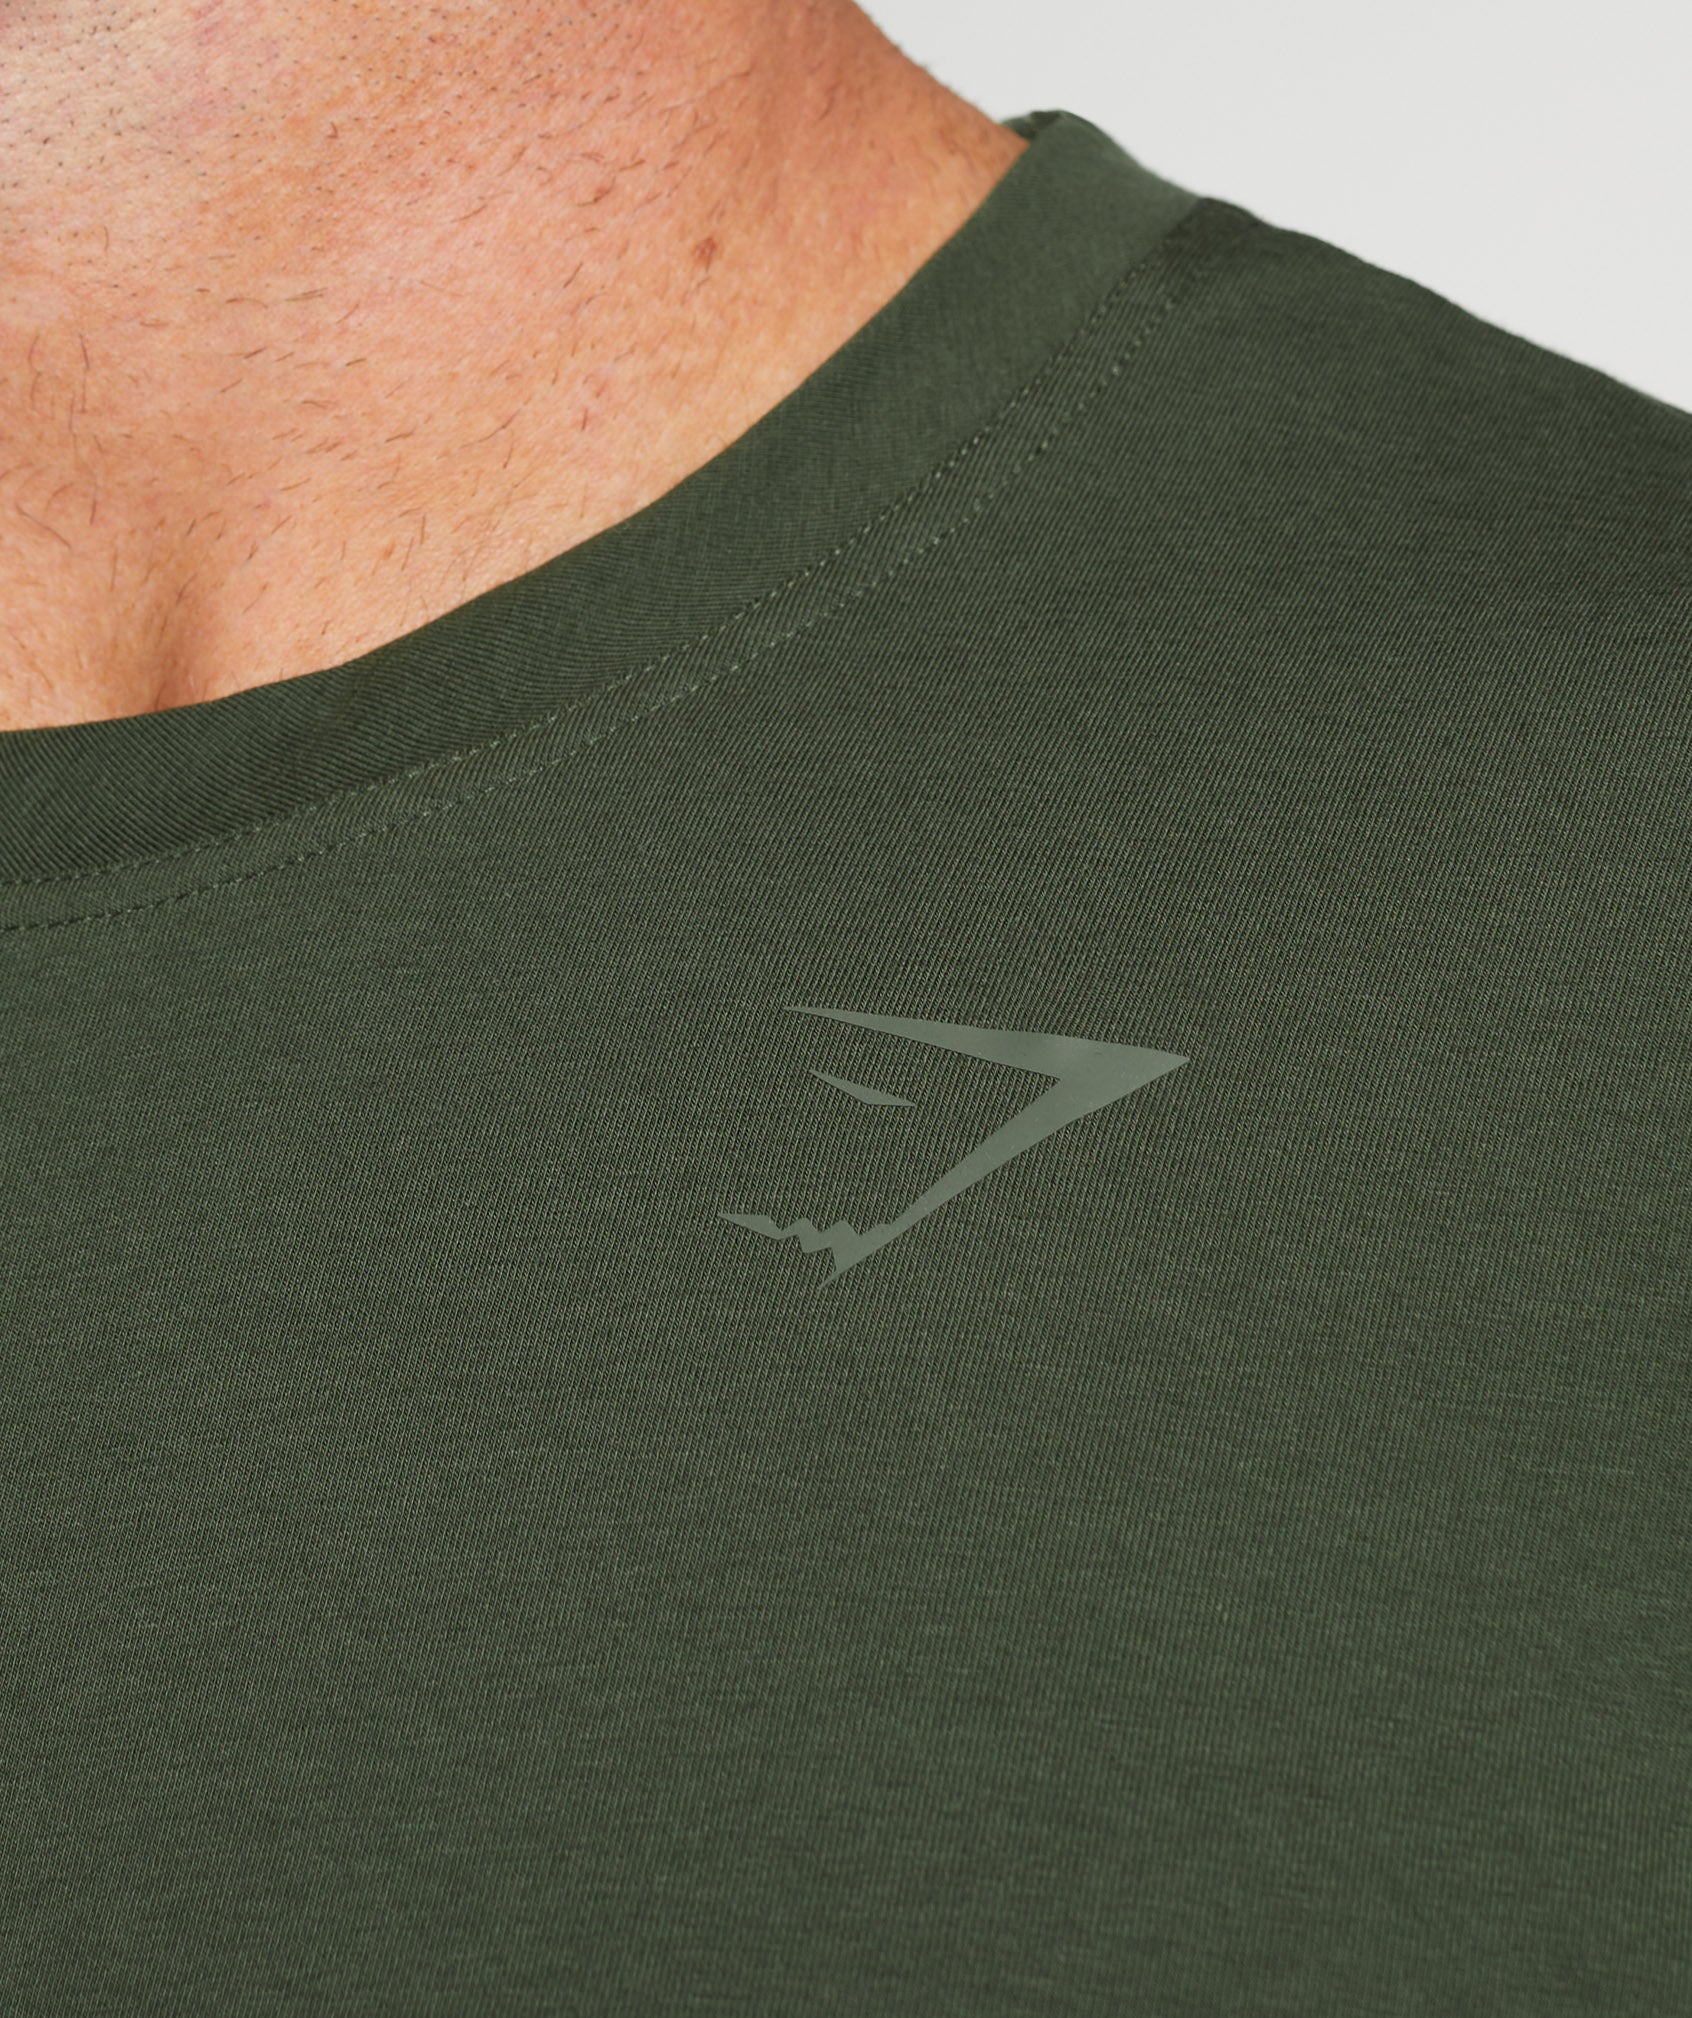 Power T-Shirt in Moss Olive